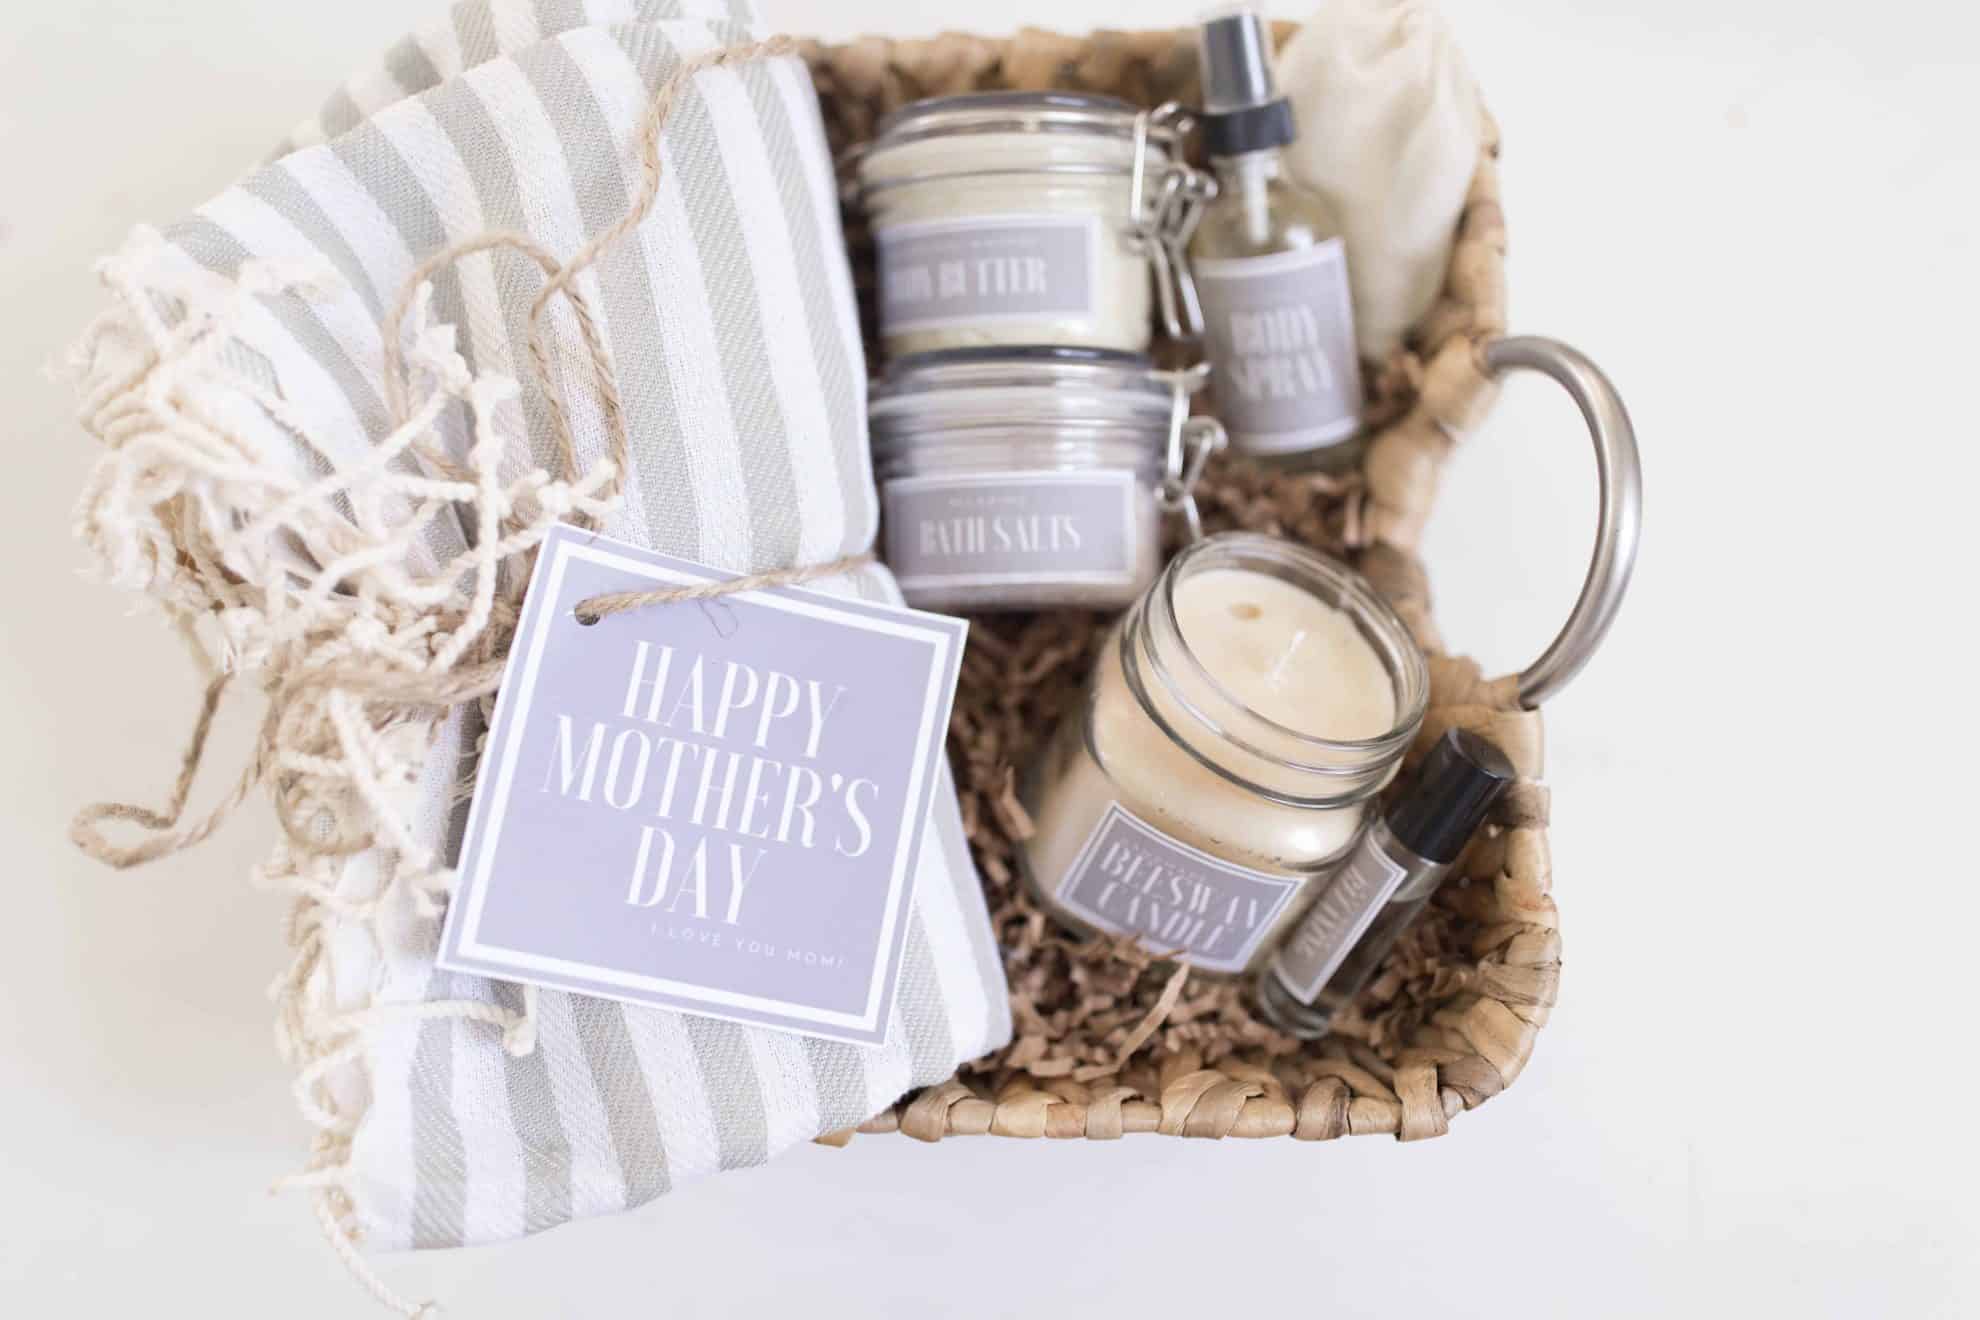 https://www.farmhouseonboone.com/wp-content/uploads/2018/04/mothers-day-gift-baskets-8.jpg